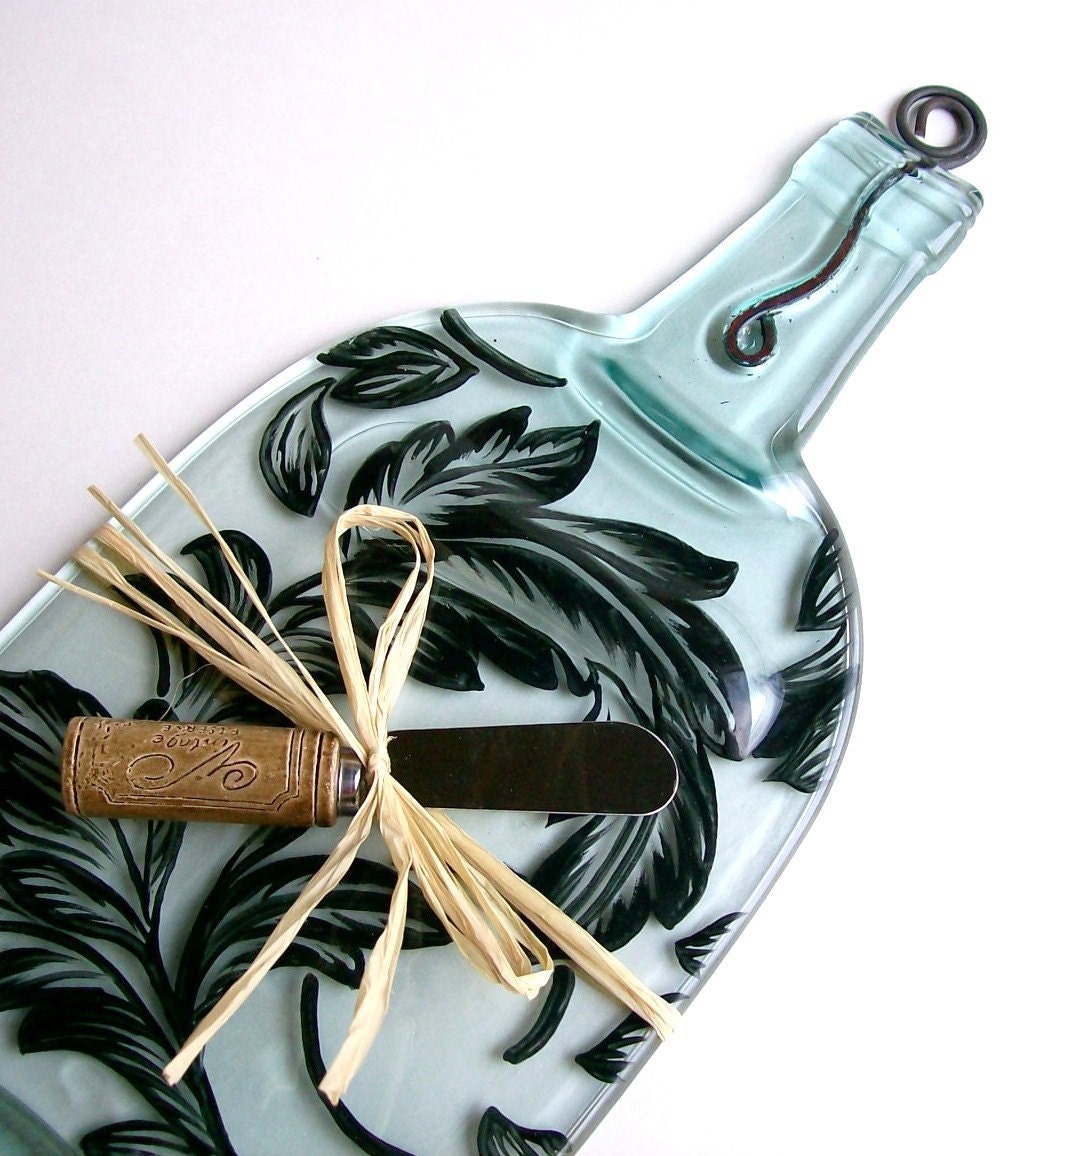 Recycled Wine Bottle Serving Tray/Cheese Board With Wine Cork Spreader